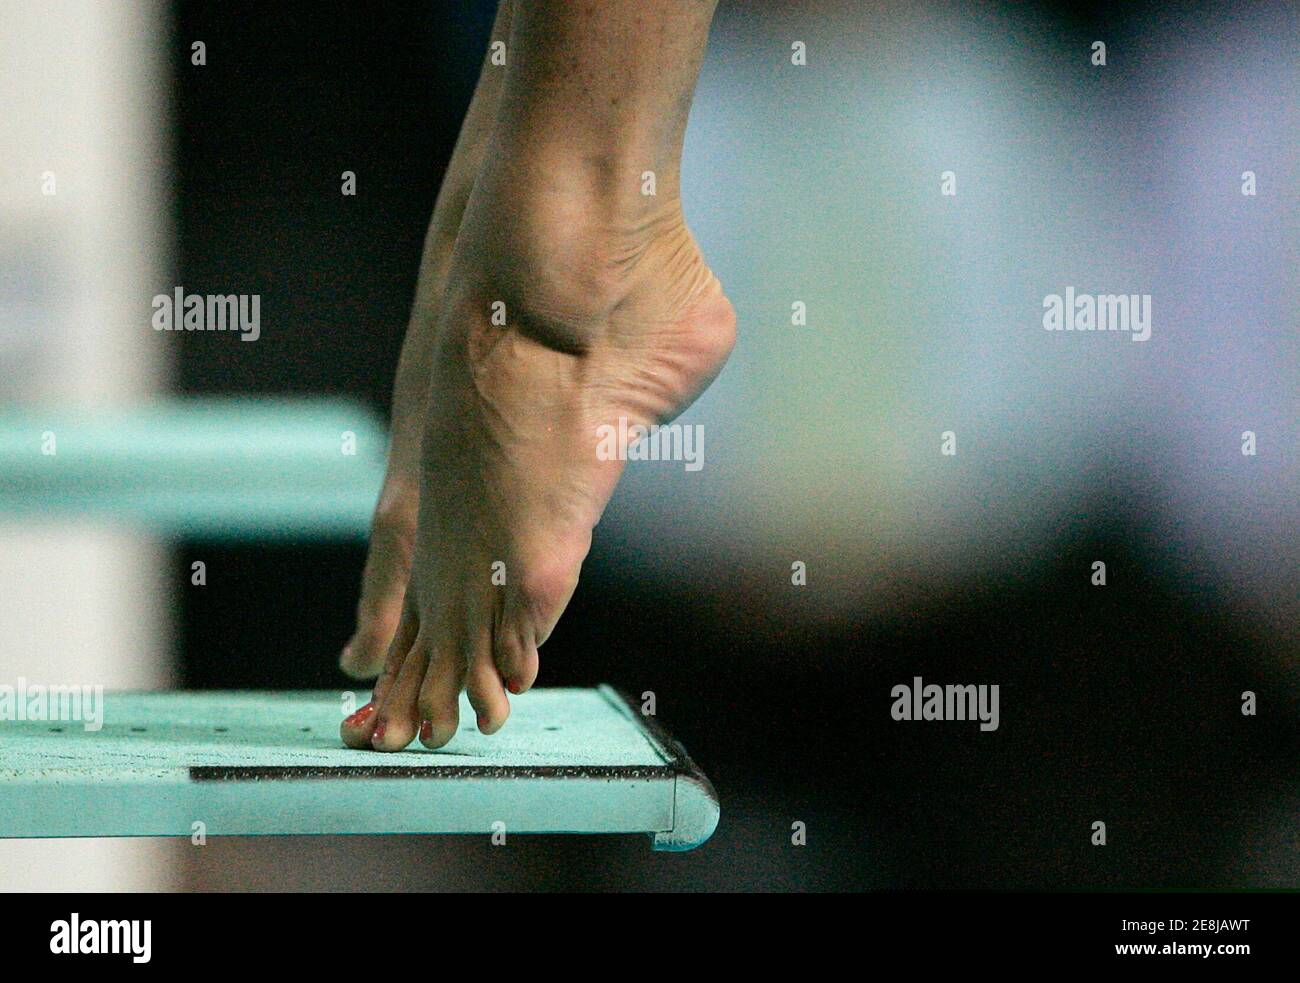 The feet of South African diver Jenna Dreyer push away from the 3M springboard during the women's competition at the Commonwealth Games in Melbourne, Australia March 25, 2006. Dreyer placed 10th in the competition. Stock Photo